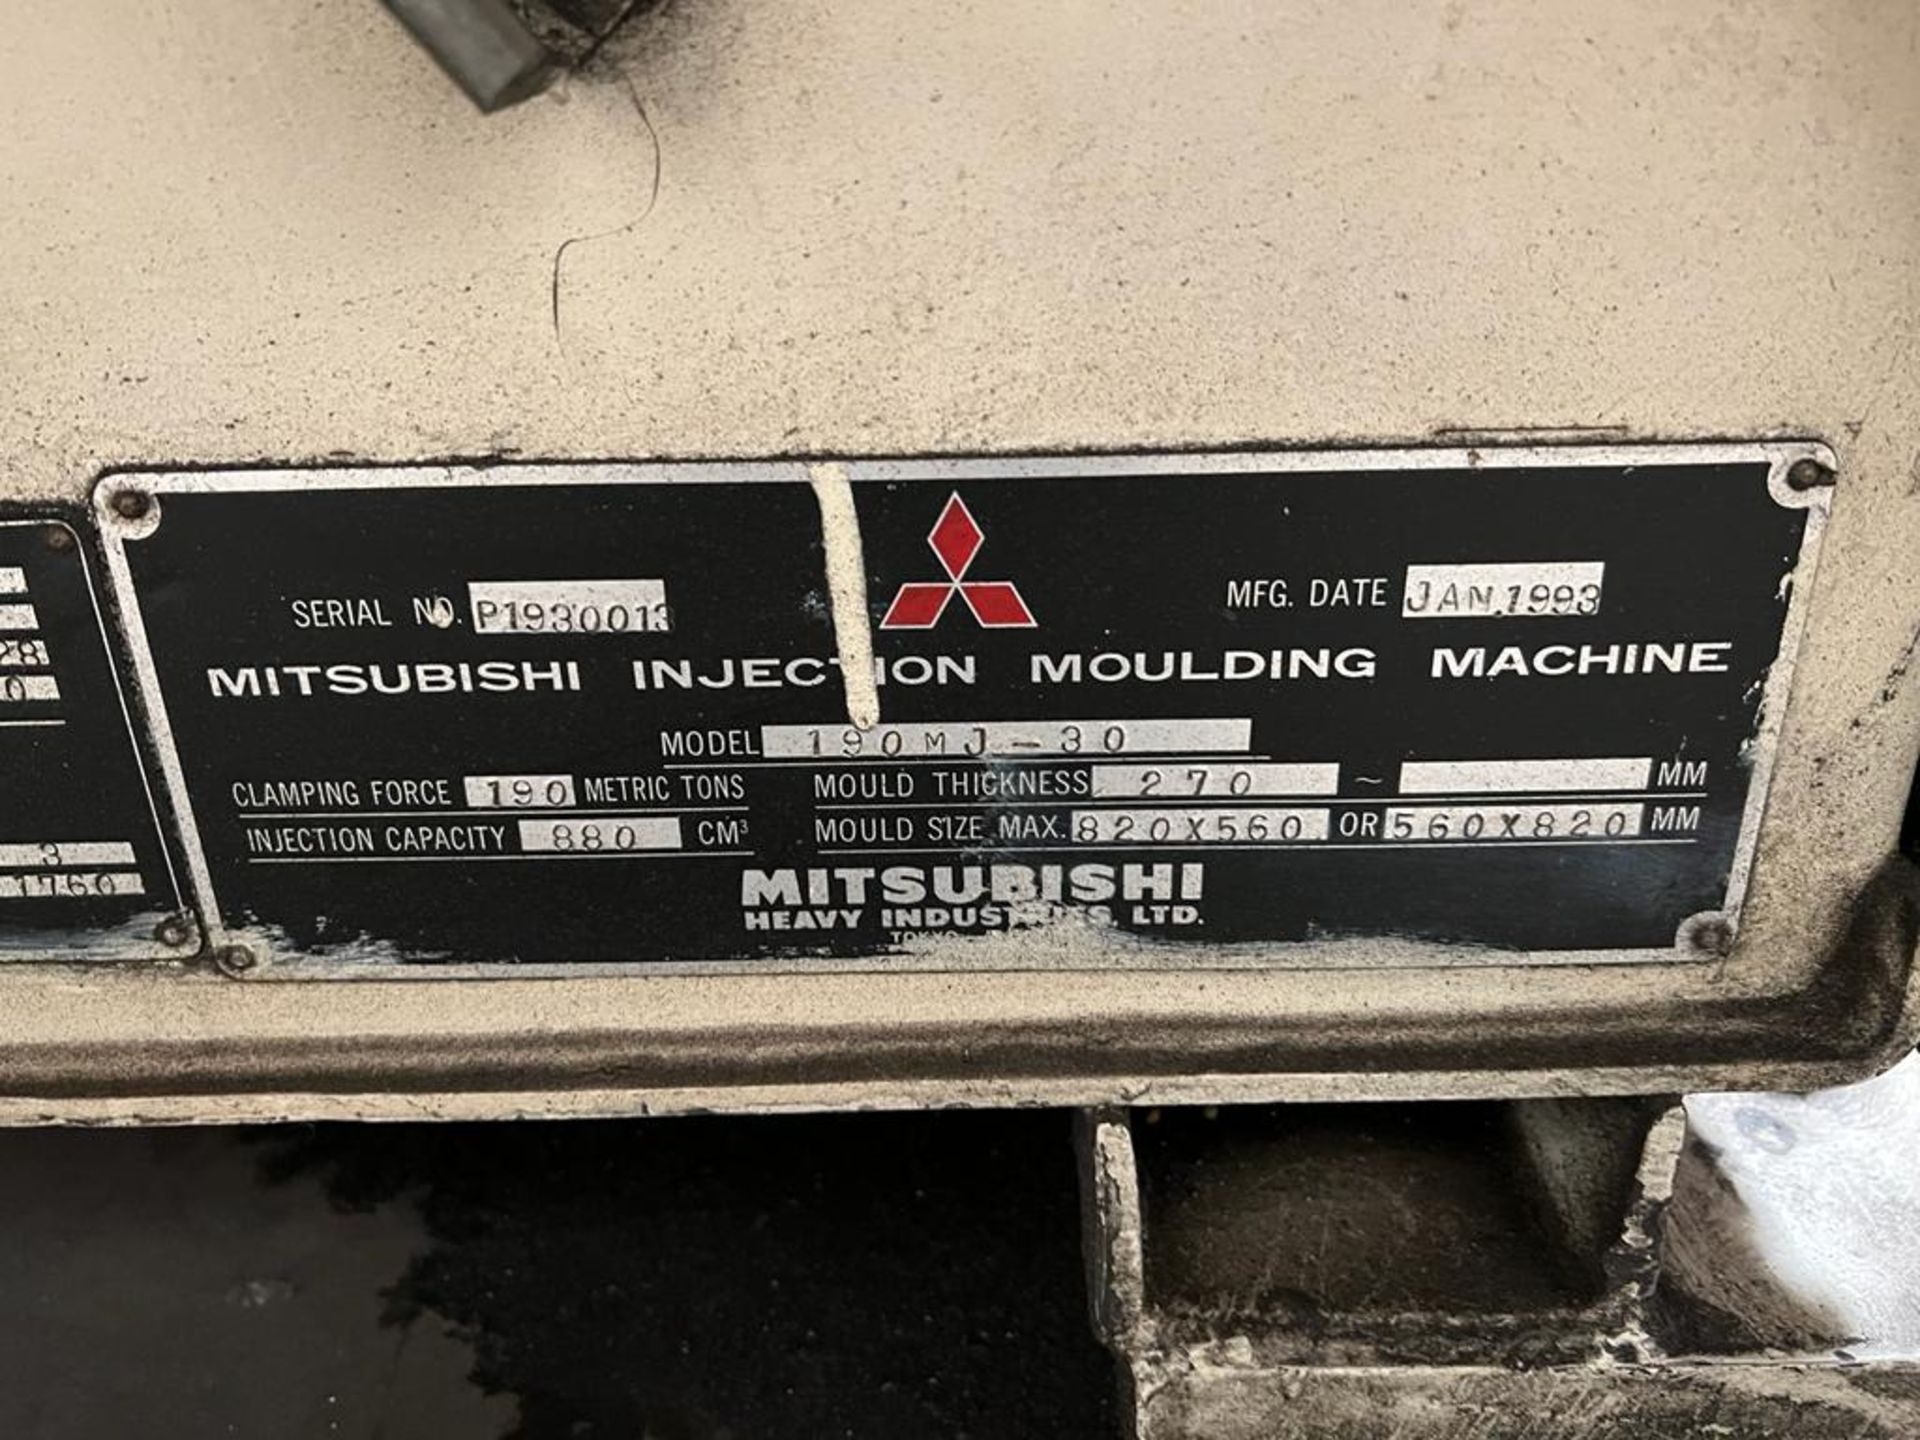 1993 MITSUBISHI MODEL 190MJ-30, 210 US TON PLASTIC INJECTION MOLDER, 53.7 SHOT SIZE, SOLD AS-IS - Image 13 of 13